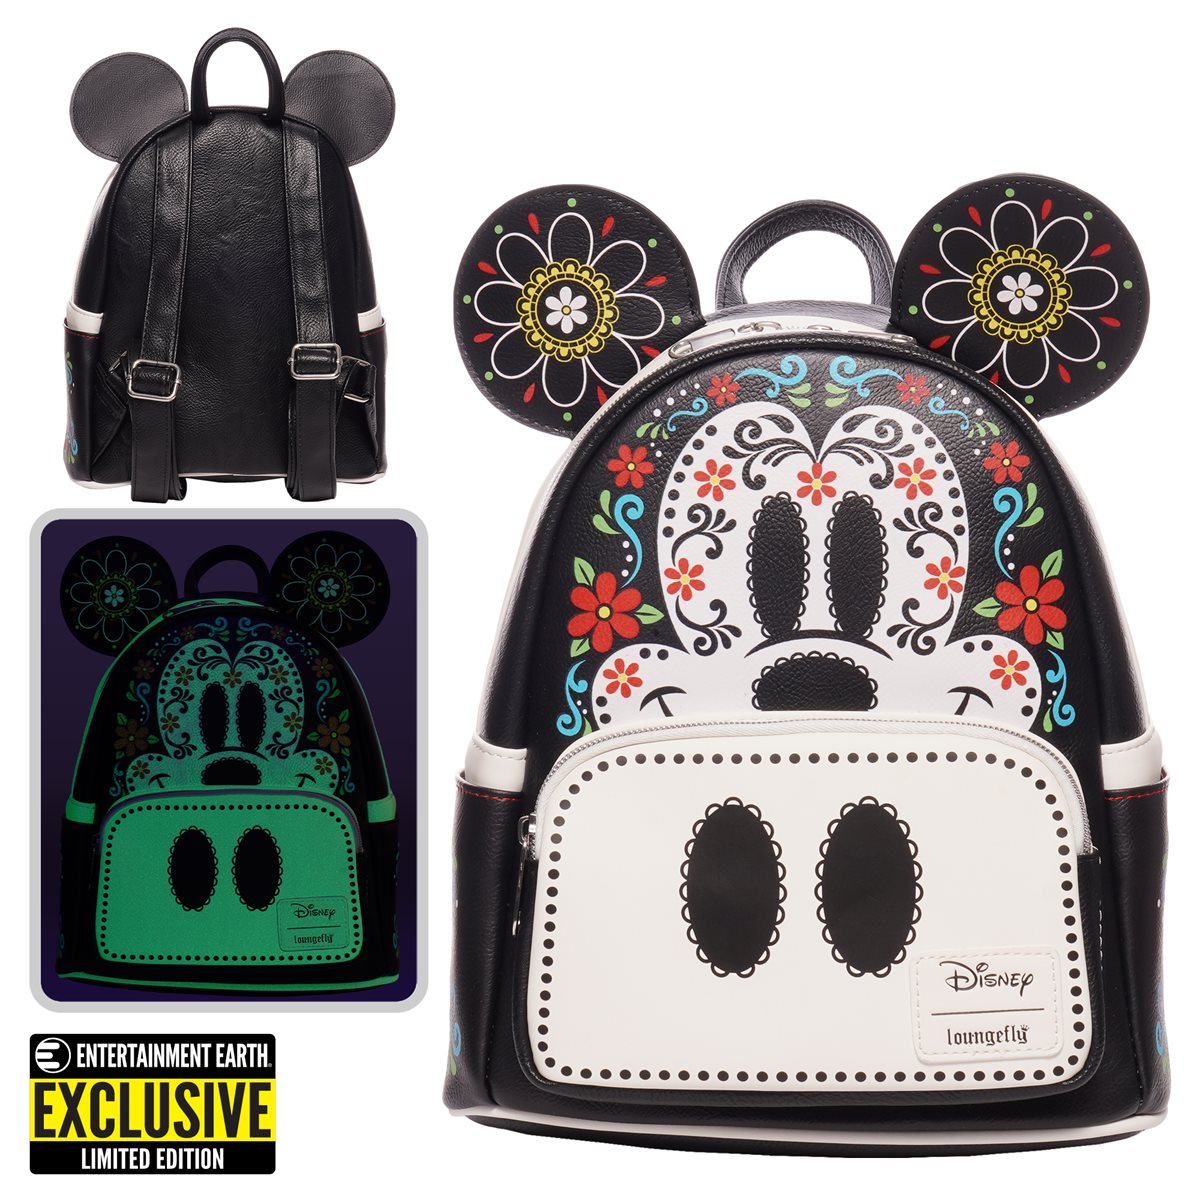 Midsize Mickey Mouse backpack